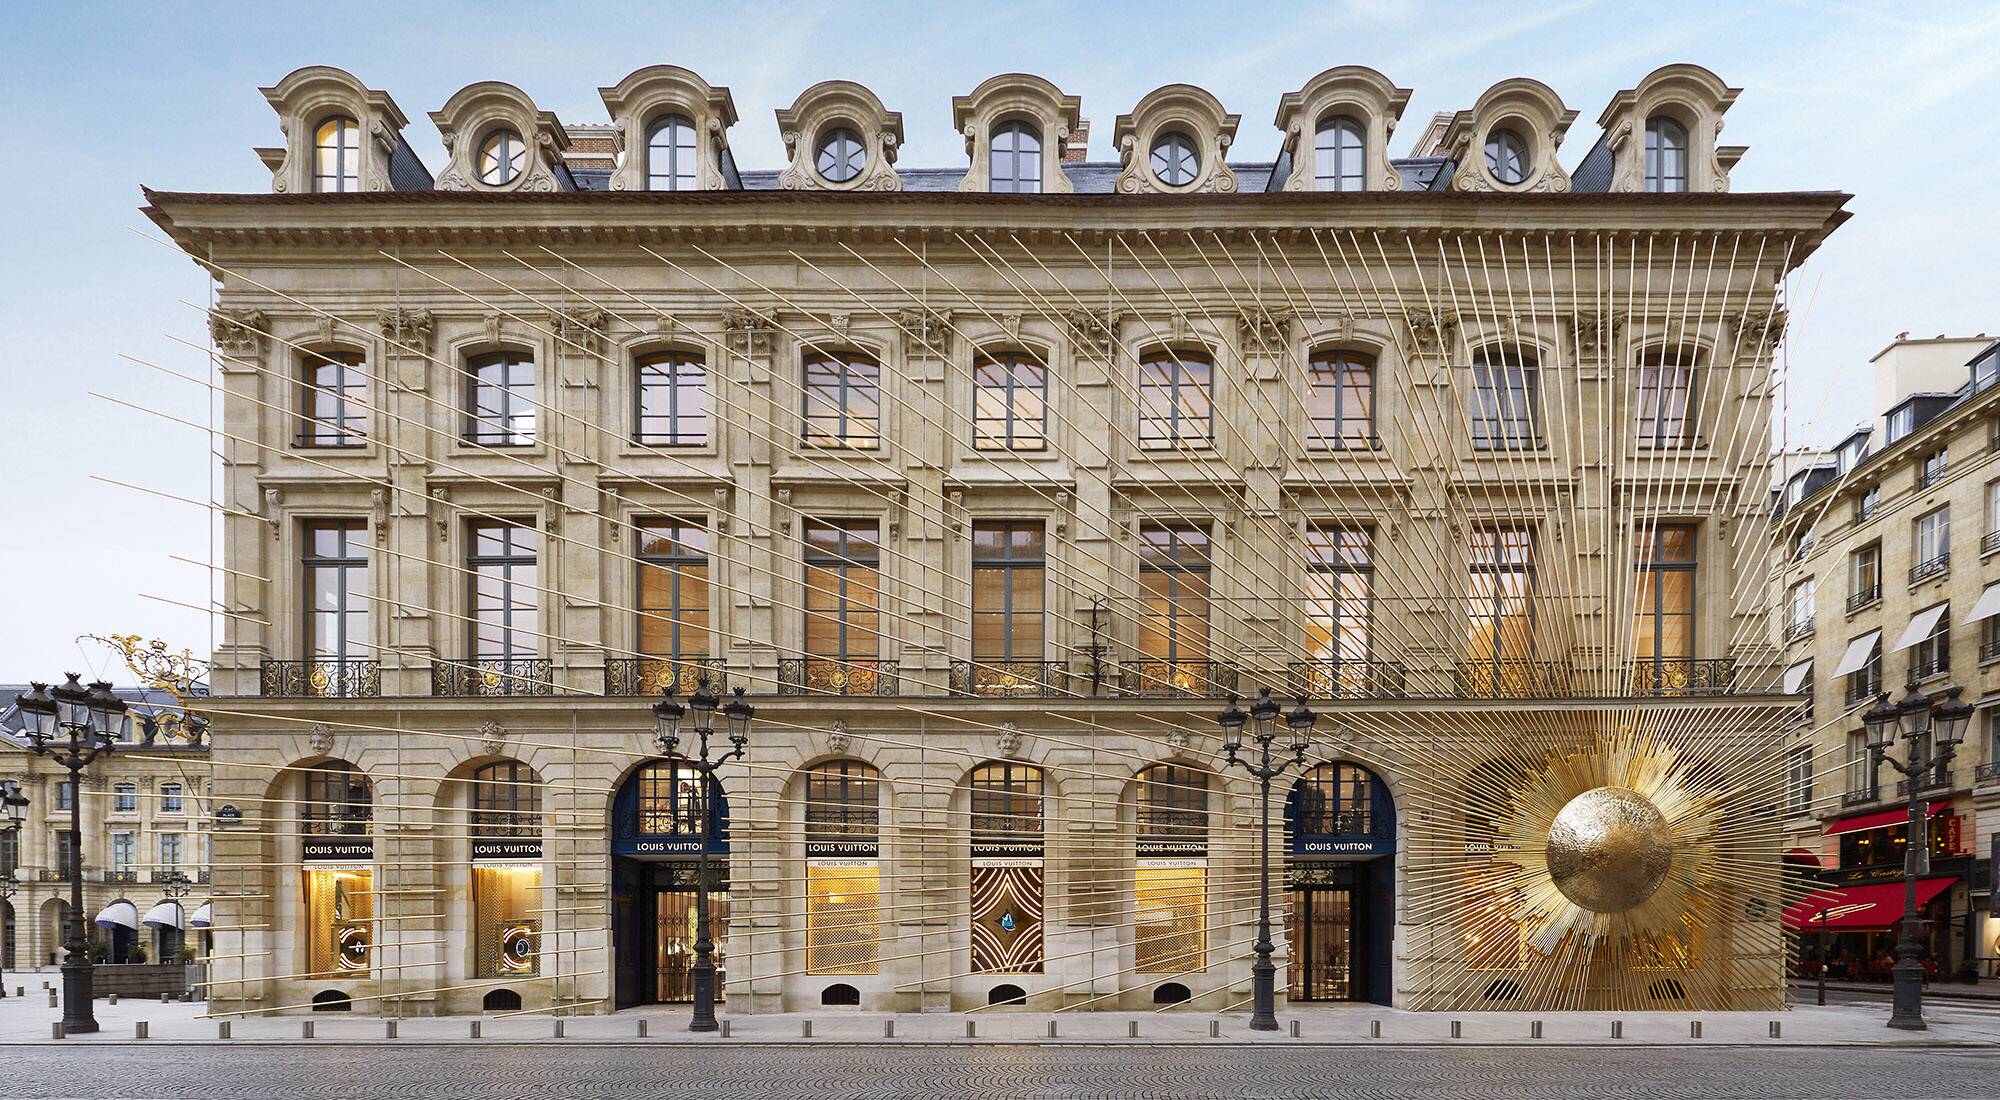 LOUIS VUITTON MAISON: All You Need to Know BEFORE You Go (with Photos)